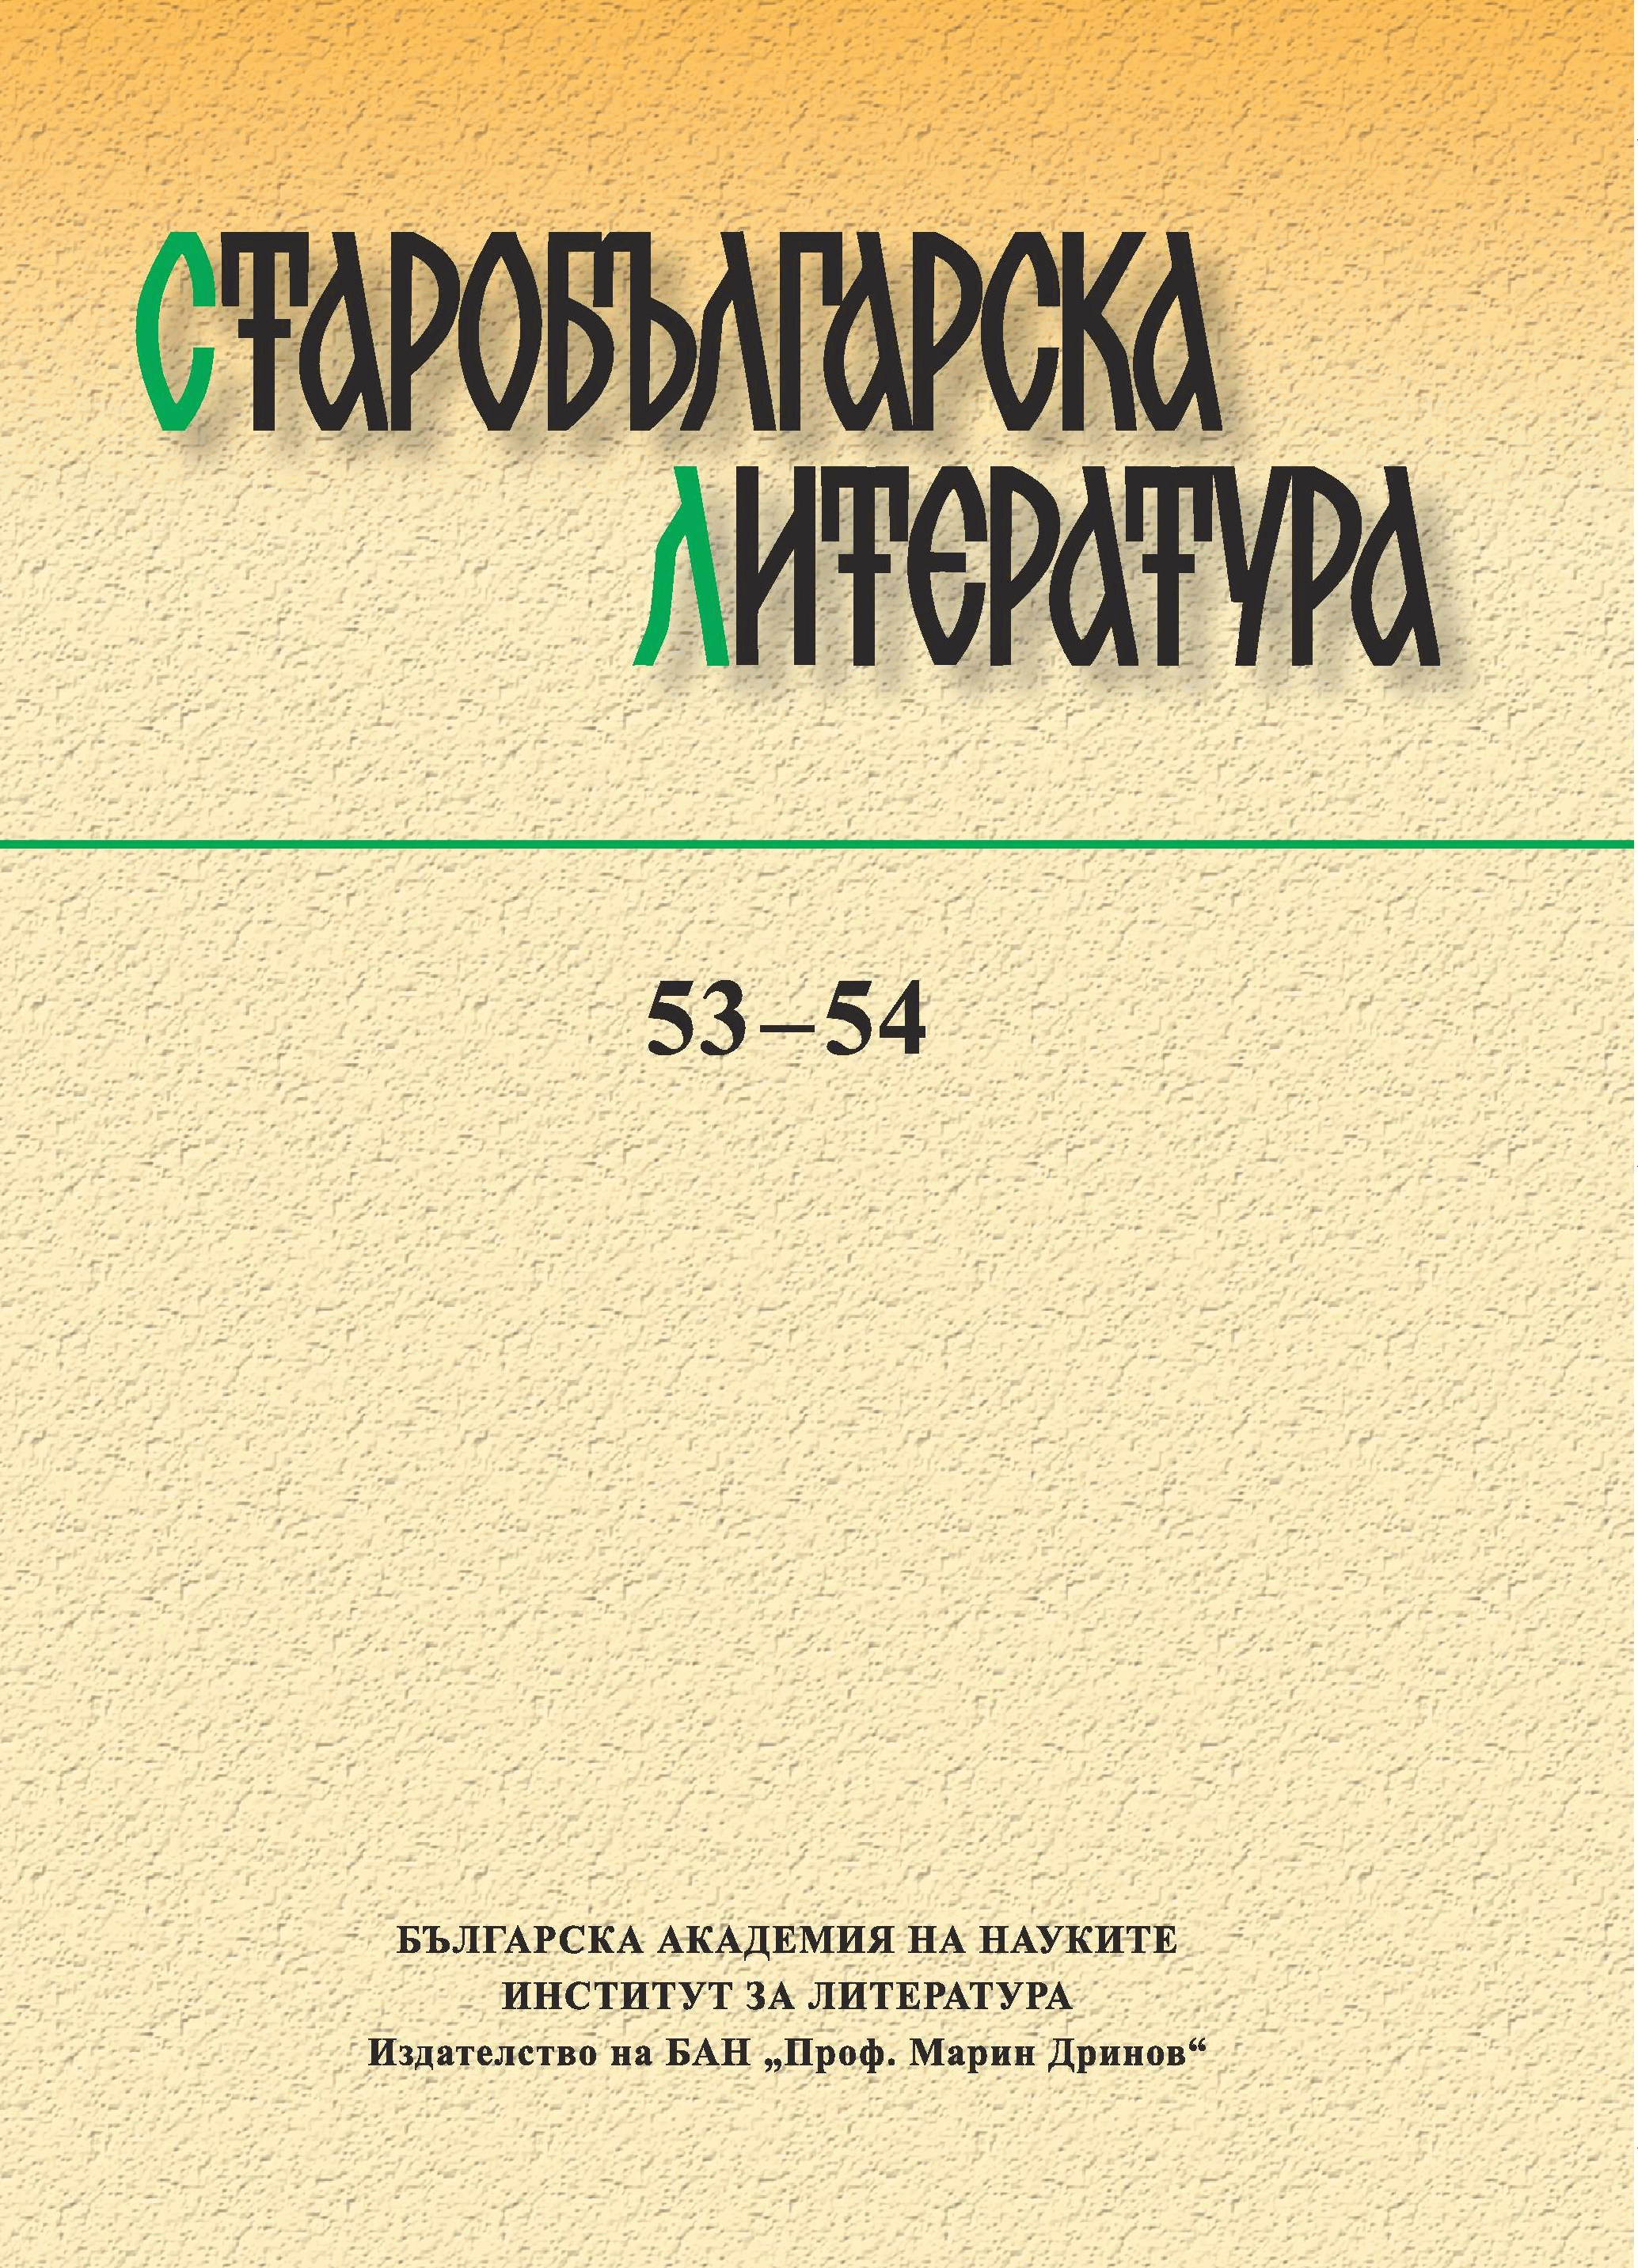 Явор Милтенов.[Zlatostruy: Old Slavonic Homiletic Collection Commissioned by the Bulgarian Tsar Symeon. Text-Critical and Source Study]. София: „Авалон“, 2013. 551 с. ISBN 978-954-9704-31-0. Cover Image